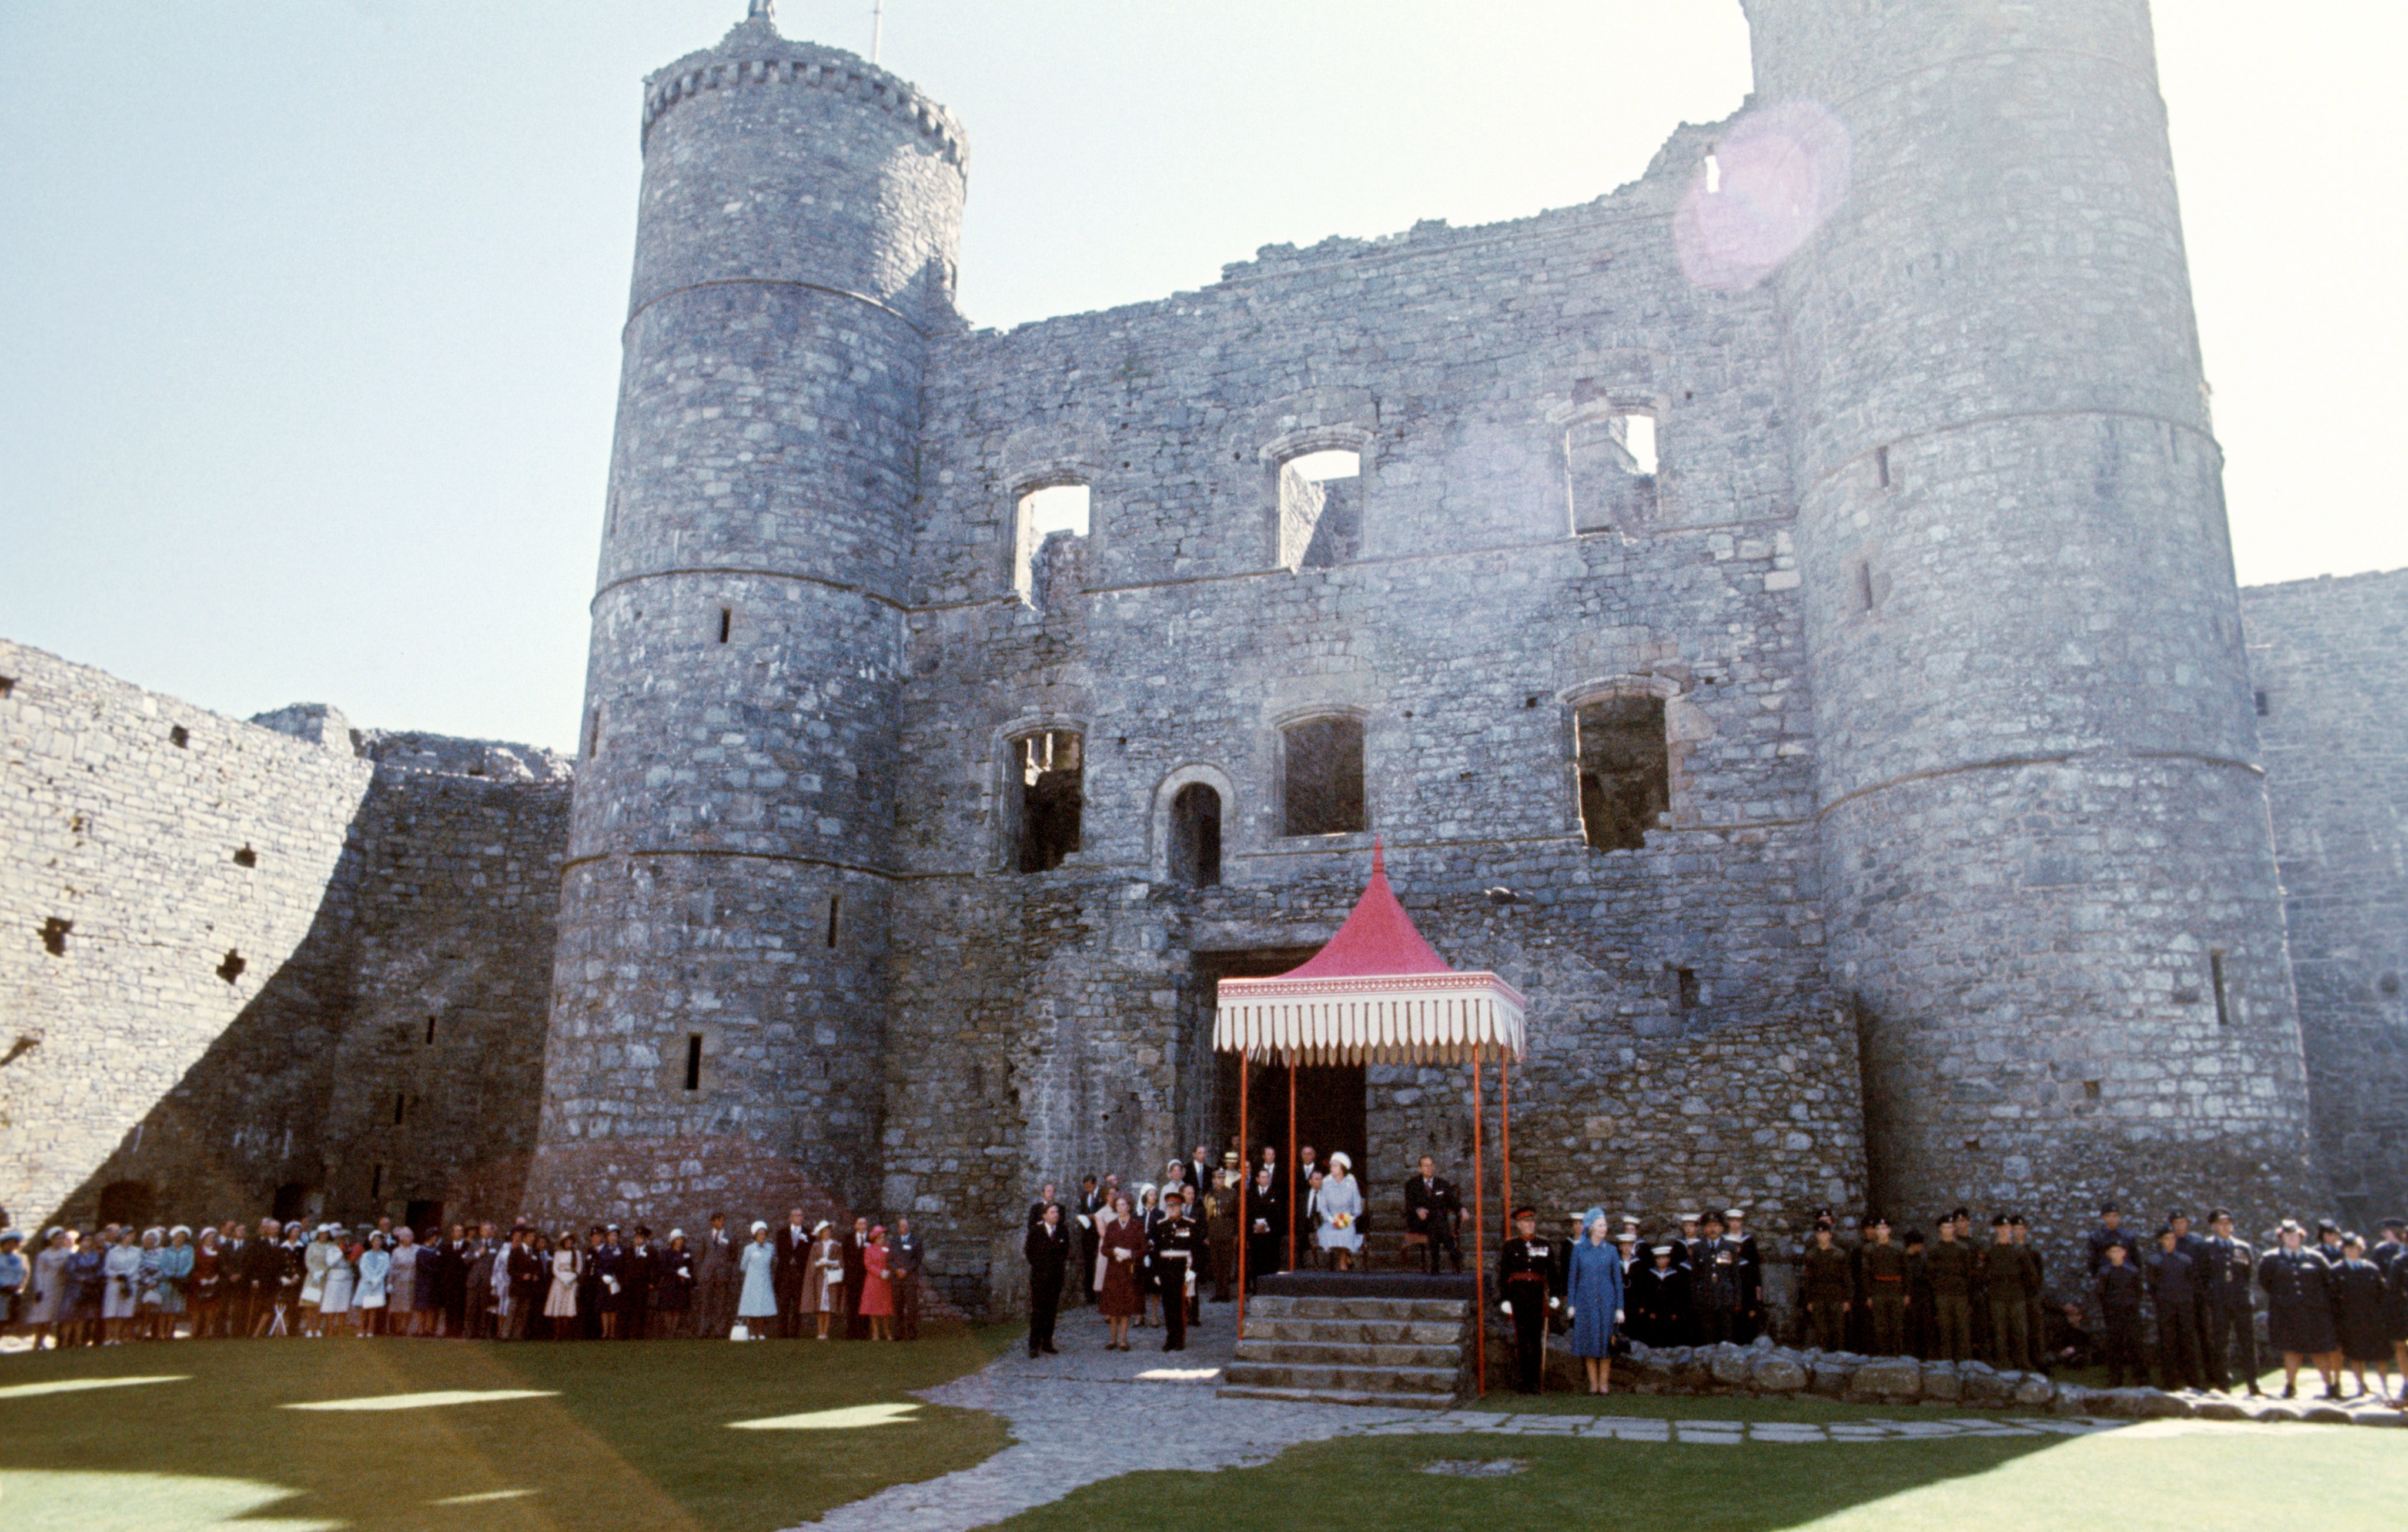 Queen Elizabeth and the Duke of Edinburgh at Harlech Castle, Glyndwr’s former stronghold, during the Silver Jubilee celebrations (PA)